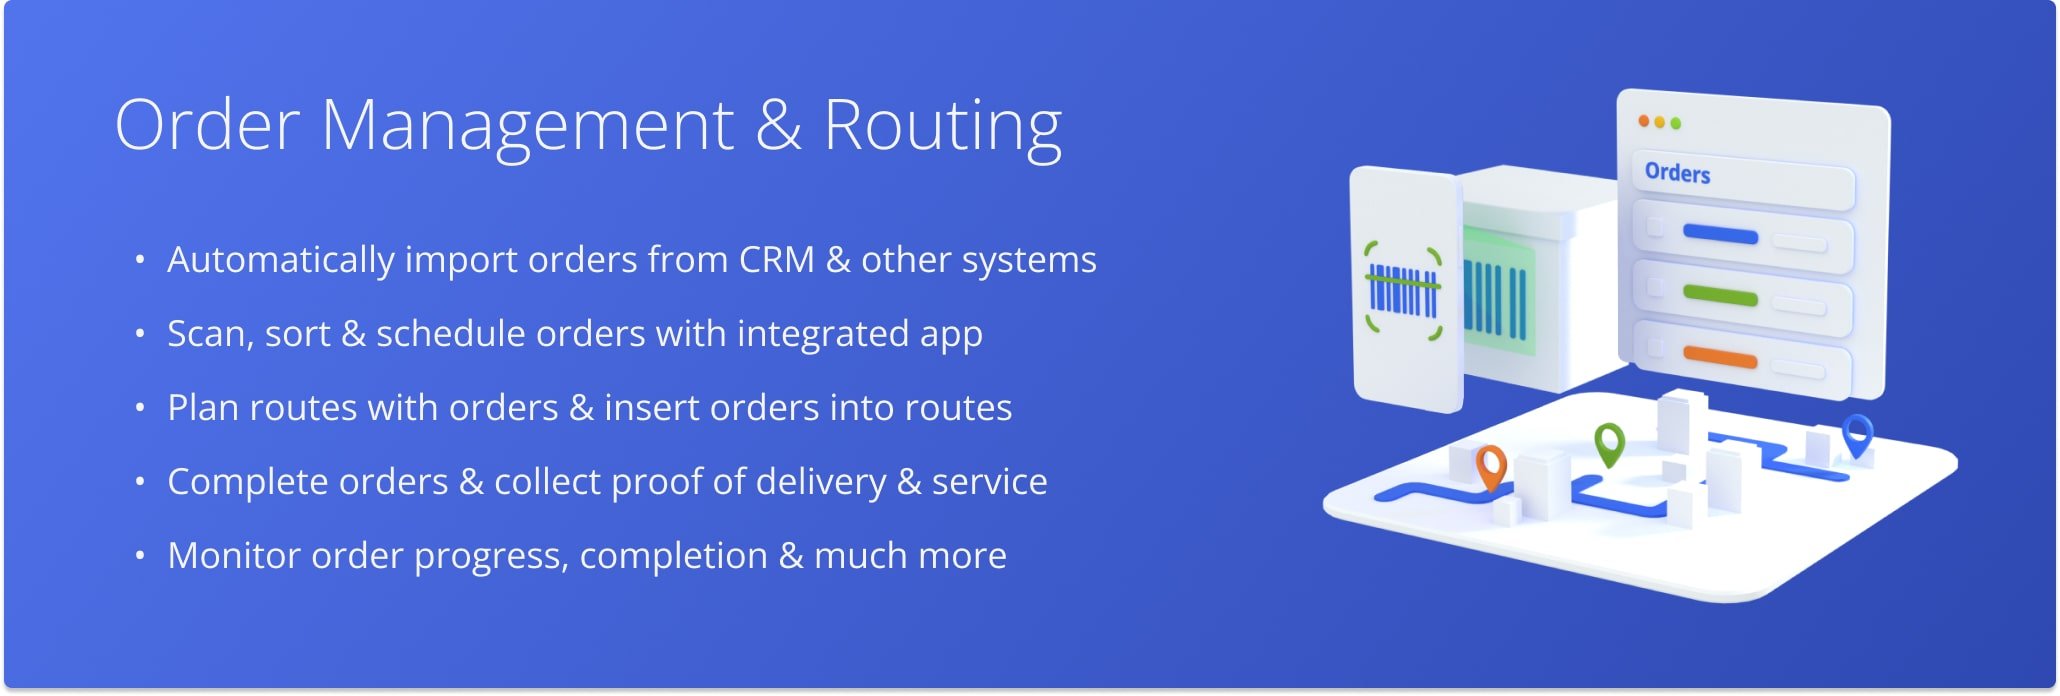 Route4Me's Order Management and Routing System enables medium and large last mile businesses to complete millions of orders effortlessly. Intuitive ERP tools help managers, route planners, dispatchers, sorters, and drivers complete every part of the order lifecycle from importing orders to planning routes, completing delivery, pickup, or service orders, monitoring progress with real-time order status updates, and more.